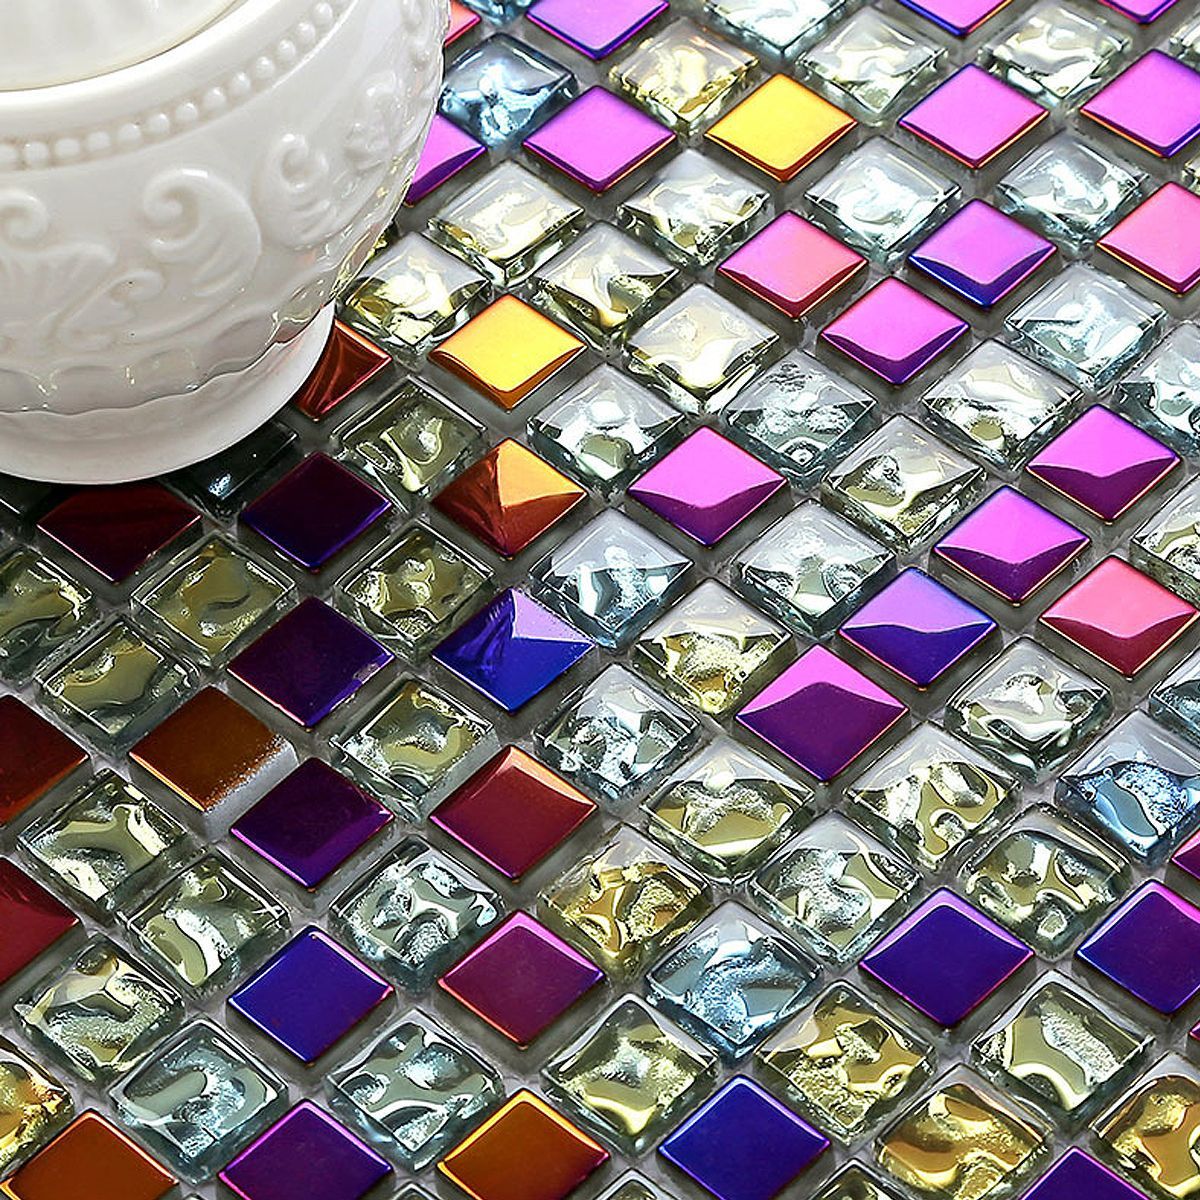 11-Pieces-Colorful-Glass-Mosaic-Wall-Tiles-Sheets-For-Living-room-Bathroom-Pub-1232401